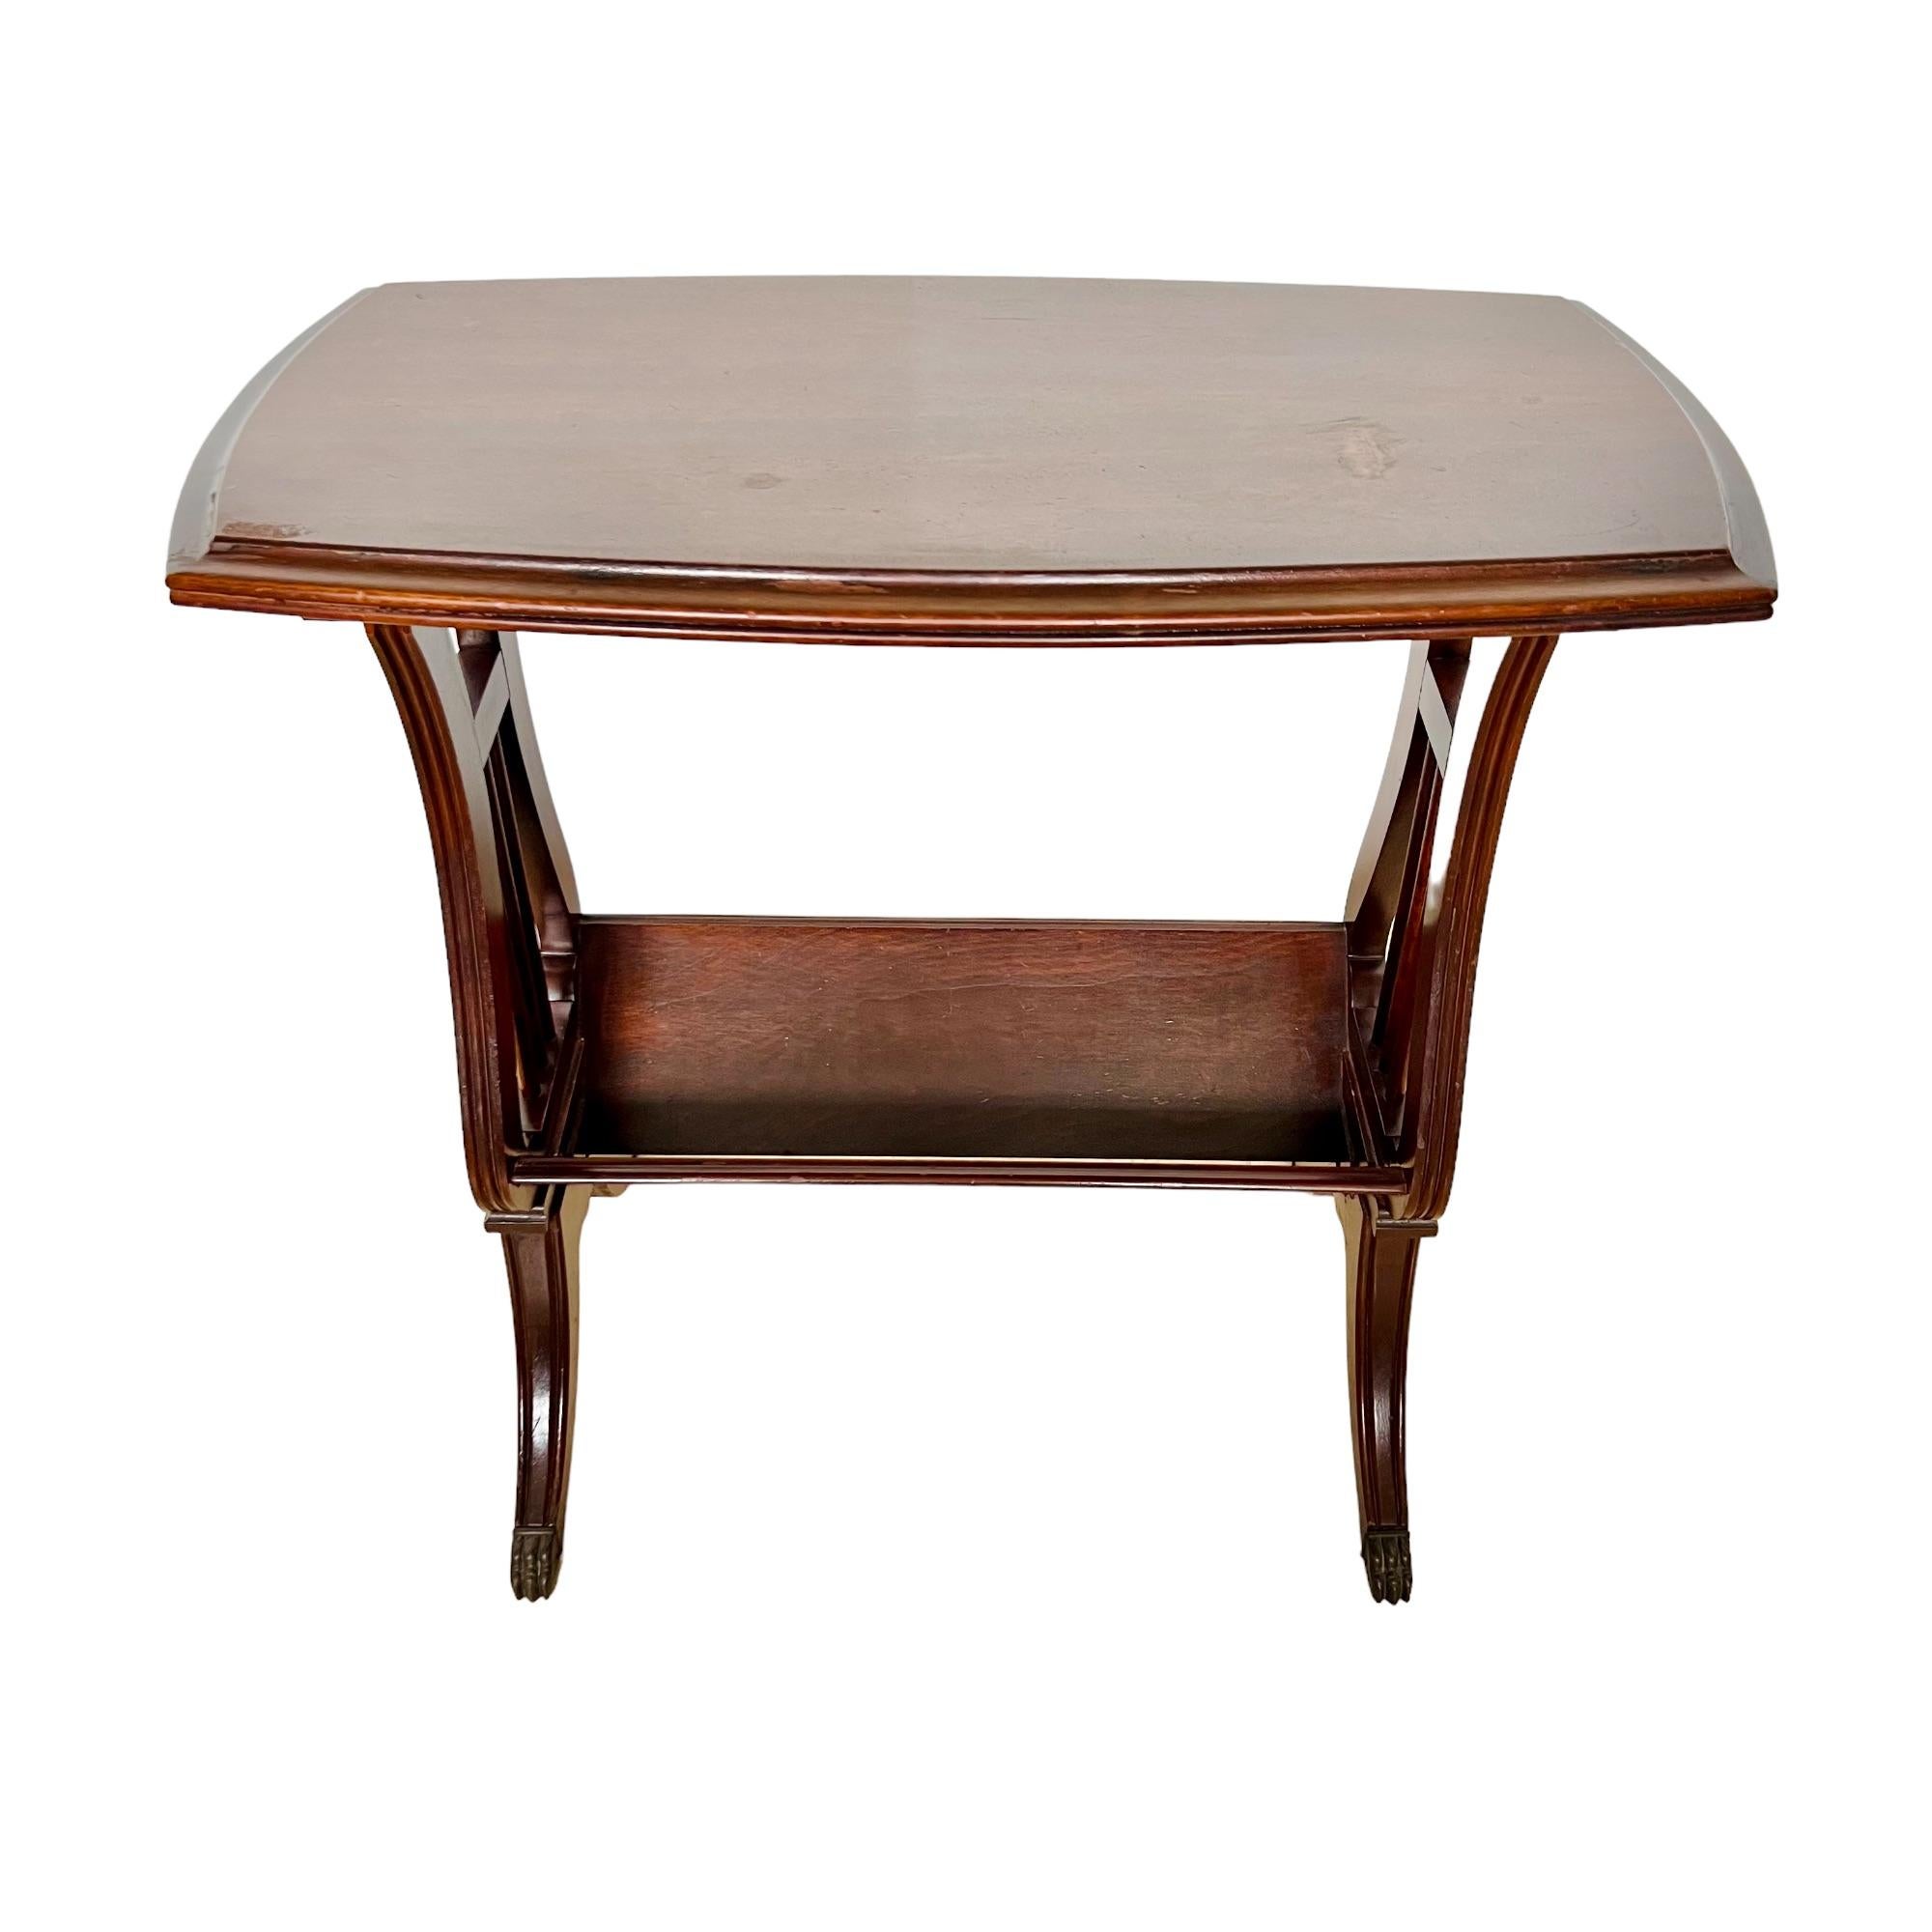 A vintage English Regency style mahogany lyre accent table. Featuring a rectangular top surface with ogee edge, a lower bookshelf supported by harp form ends and channeled saber legs with brass capped paw feet.

Dimensions: 24